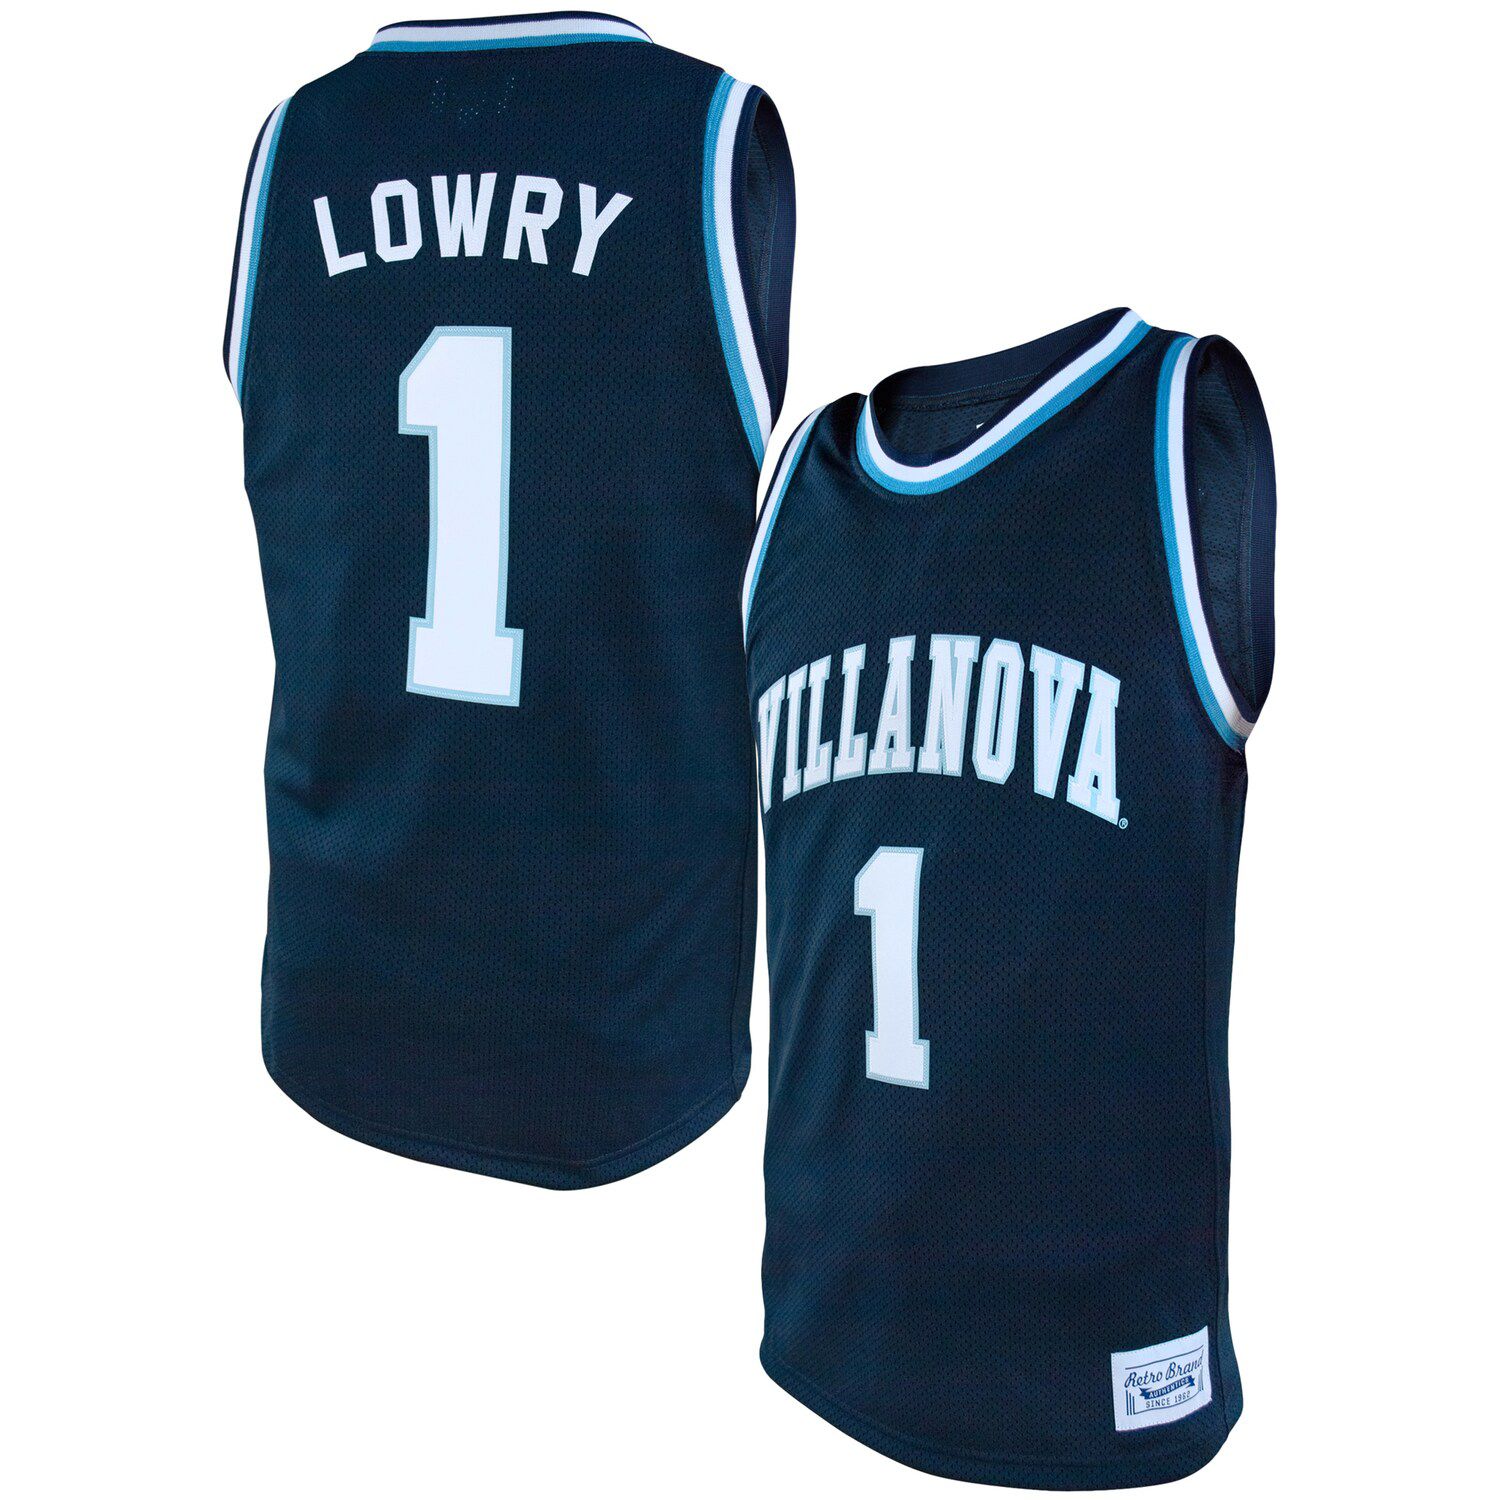 kyle lowry jersey number